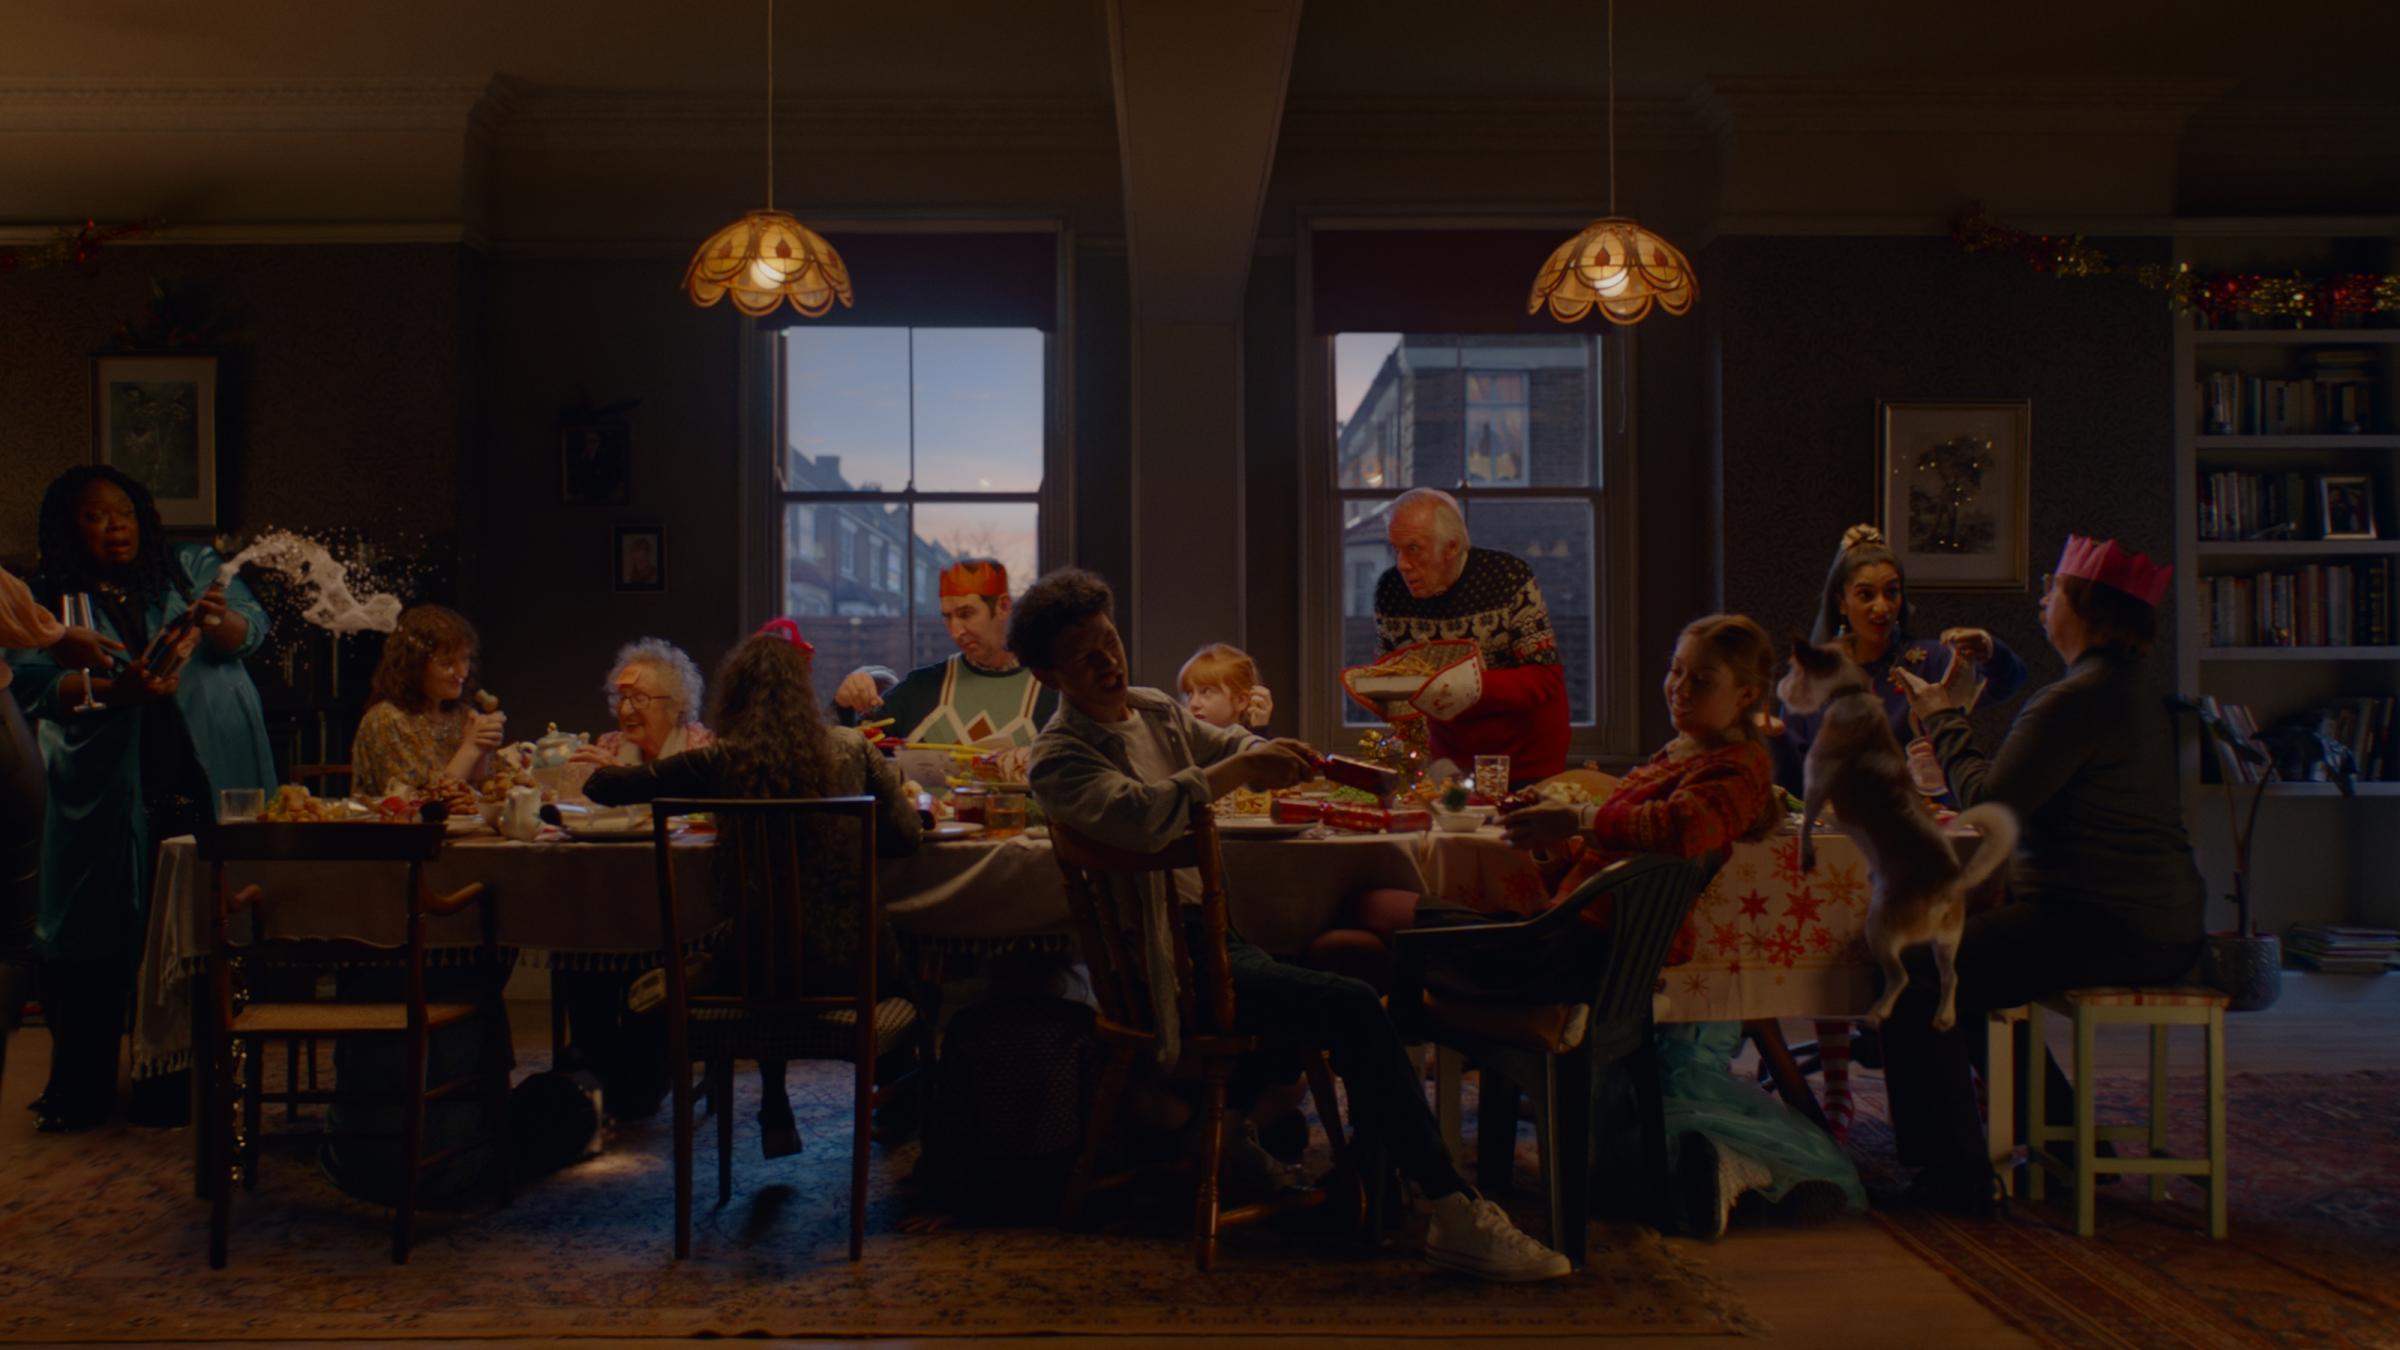 Sainsbury S Reveals Its Christmas 2021 Advert Featuring Stephen Fry Watch It Here South Wales Argus